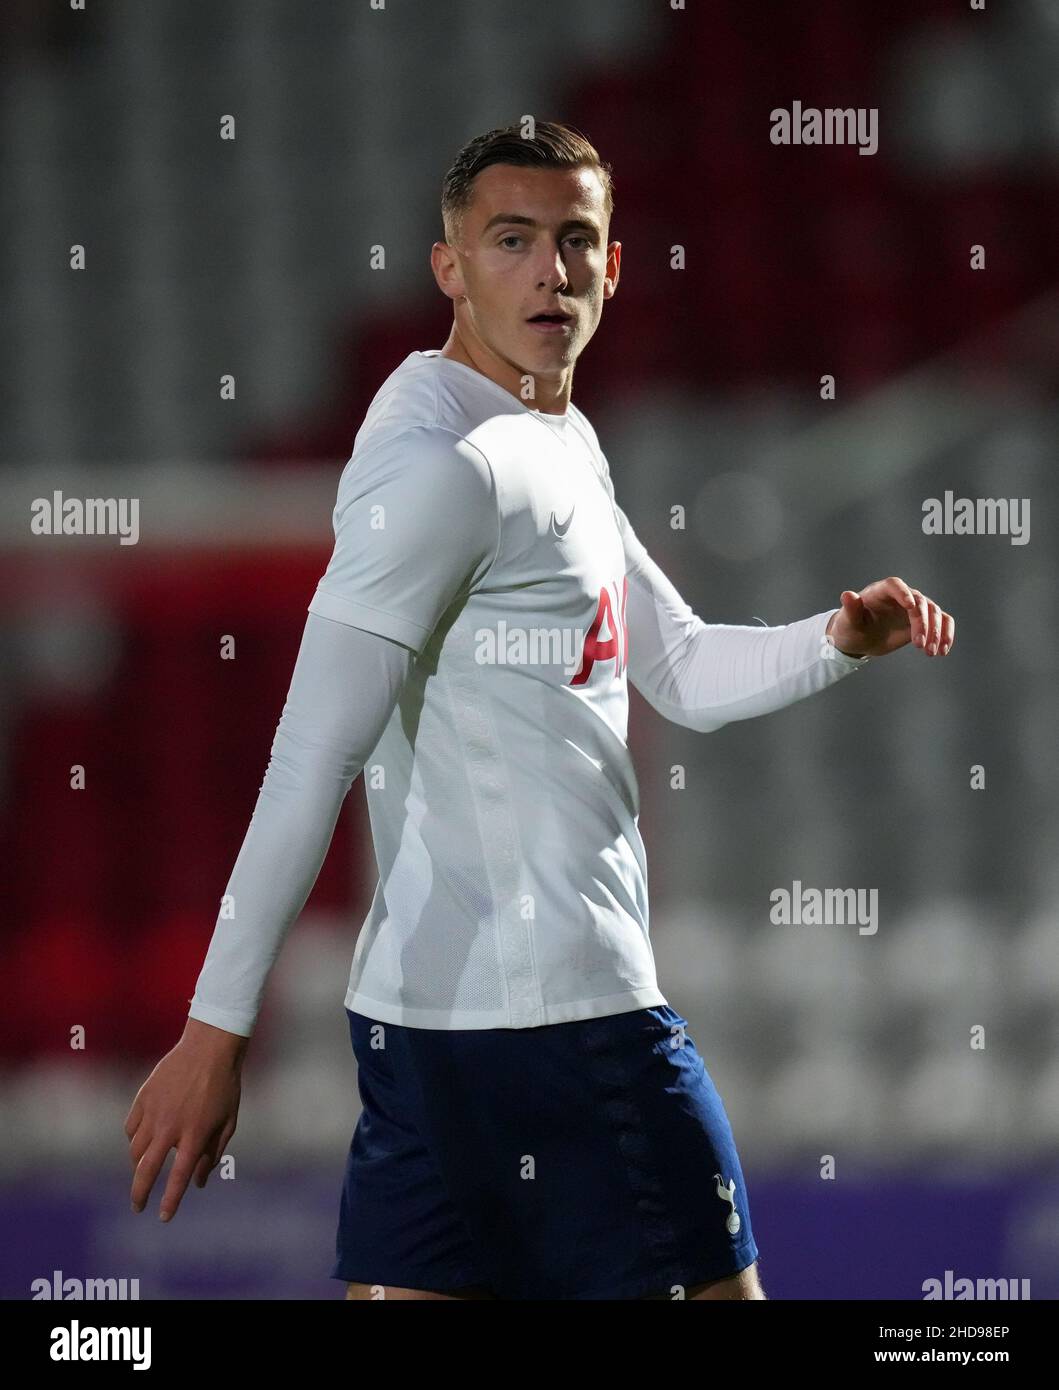 Stevenage, UK. 16th Dec, 2021. Alfie Dorrington of Spurs U18 during the FA Youth Cup third round match between Tottenham Hotspur U18 and Ipswich Town U18 at the Lamex Stadium, Stevenage, England on 16 December 2021. Photo by Andy Rowland. Credit: PRiME Media Images/Alamy Live News Stock Photo